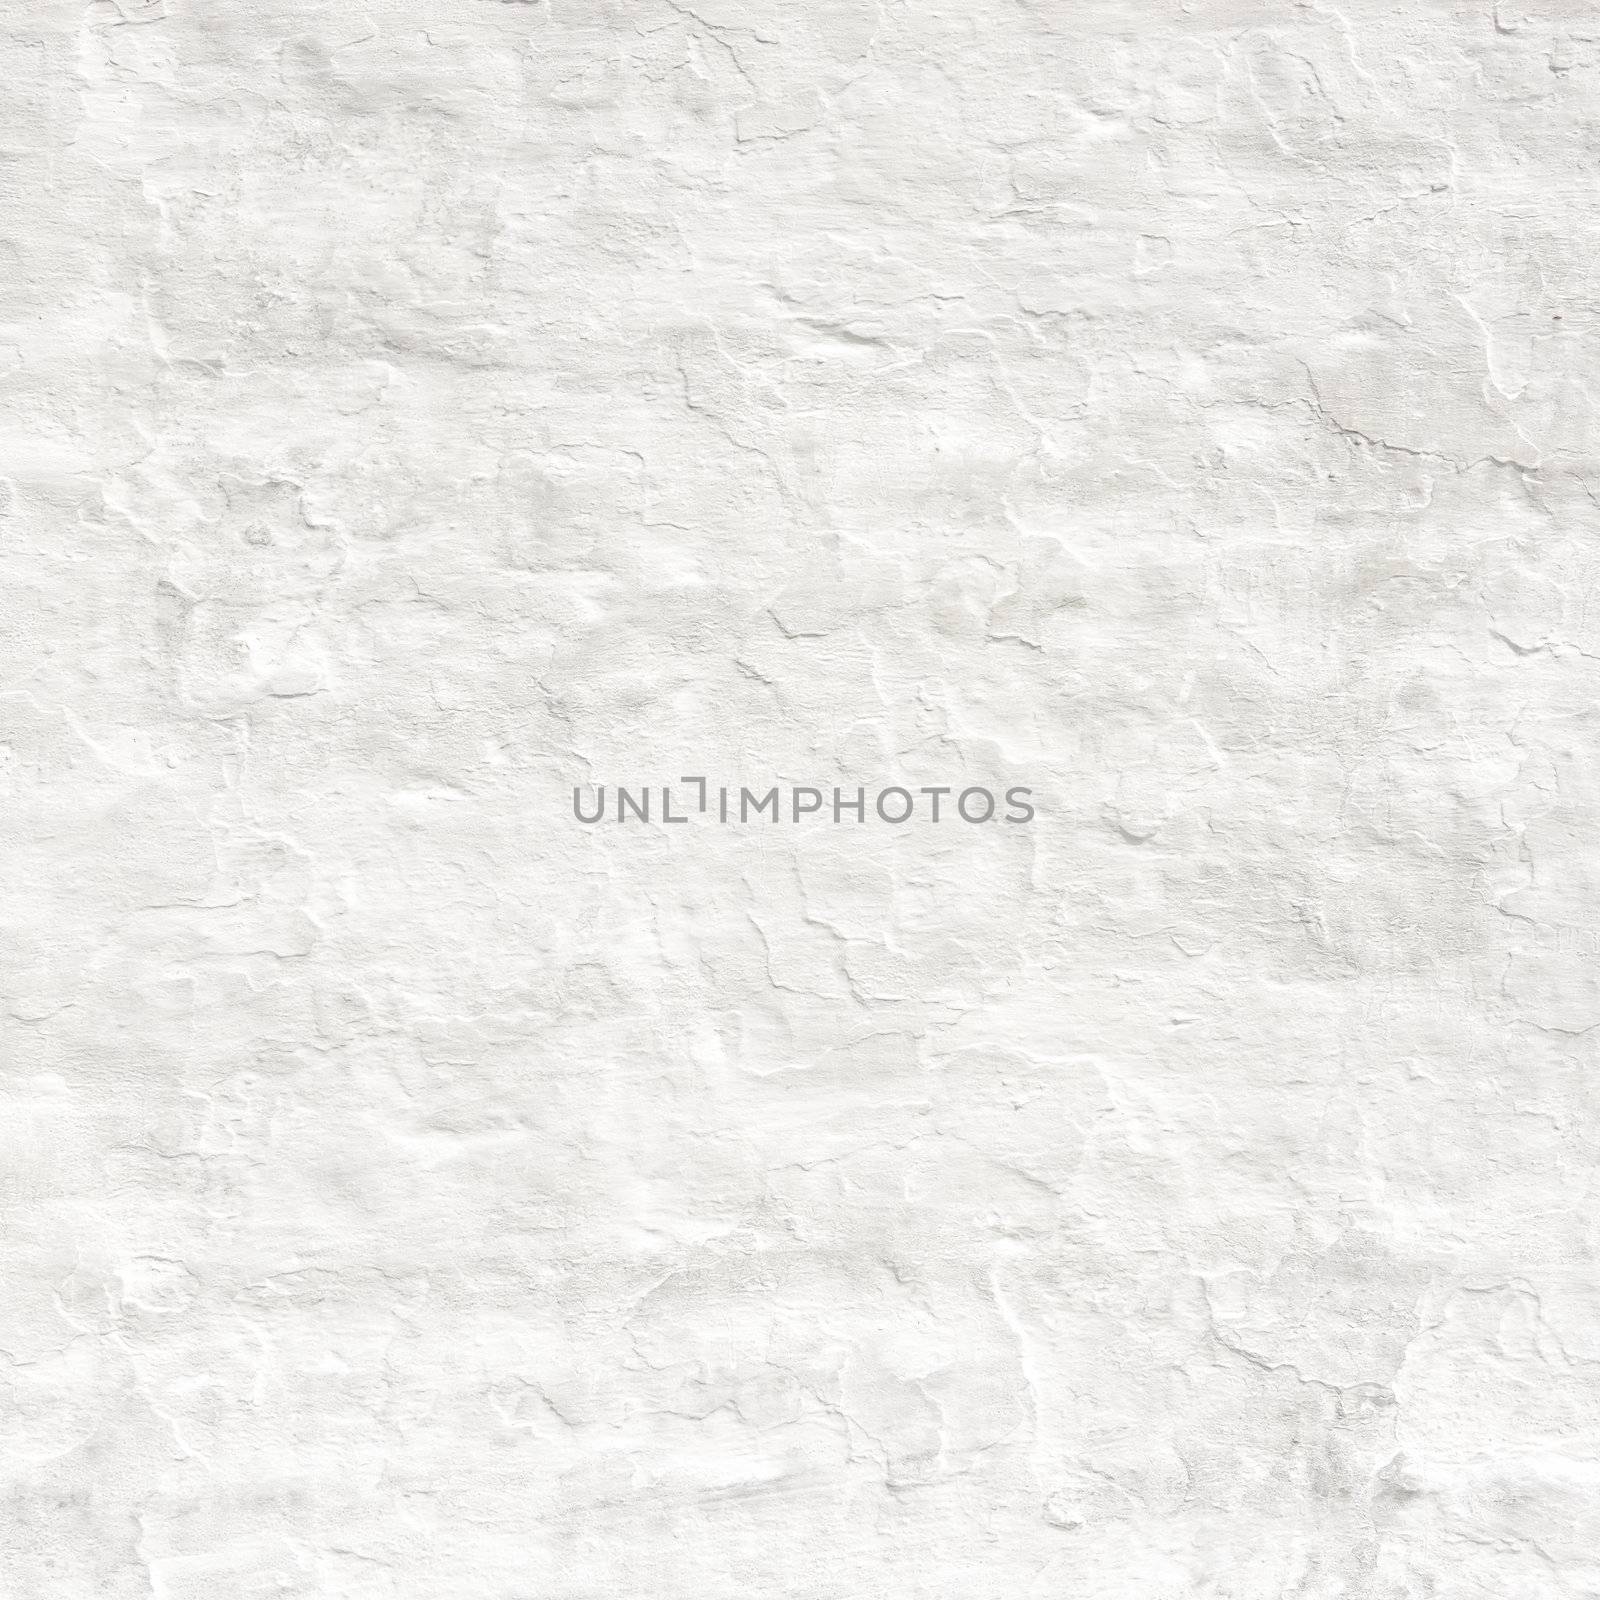 Rough white wall texture, square photograph